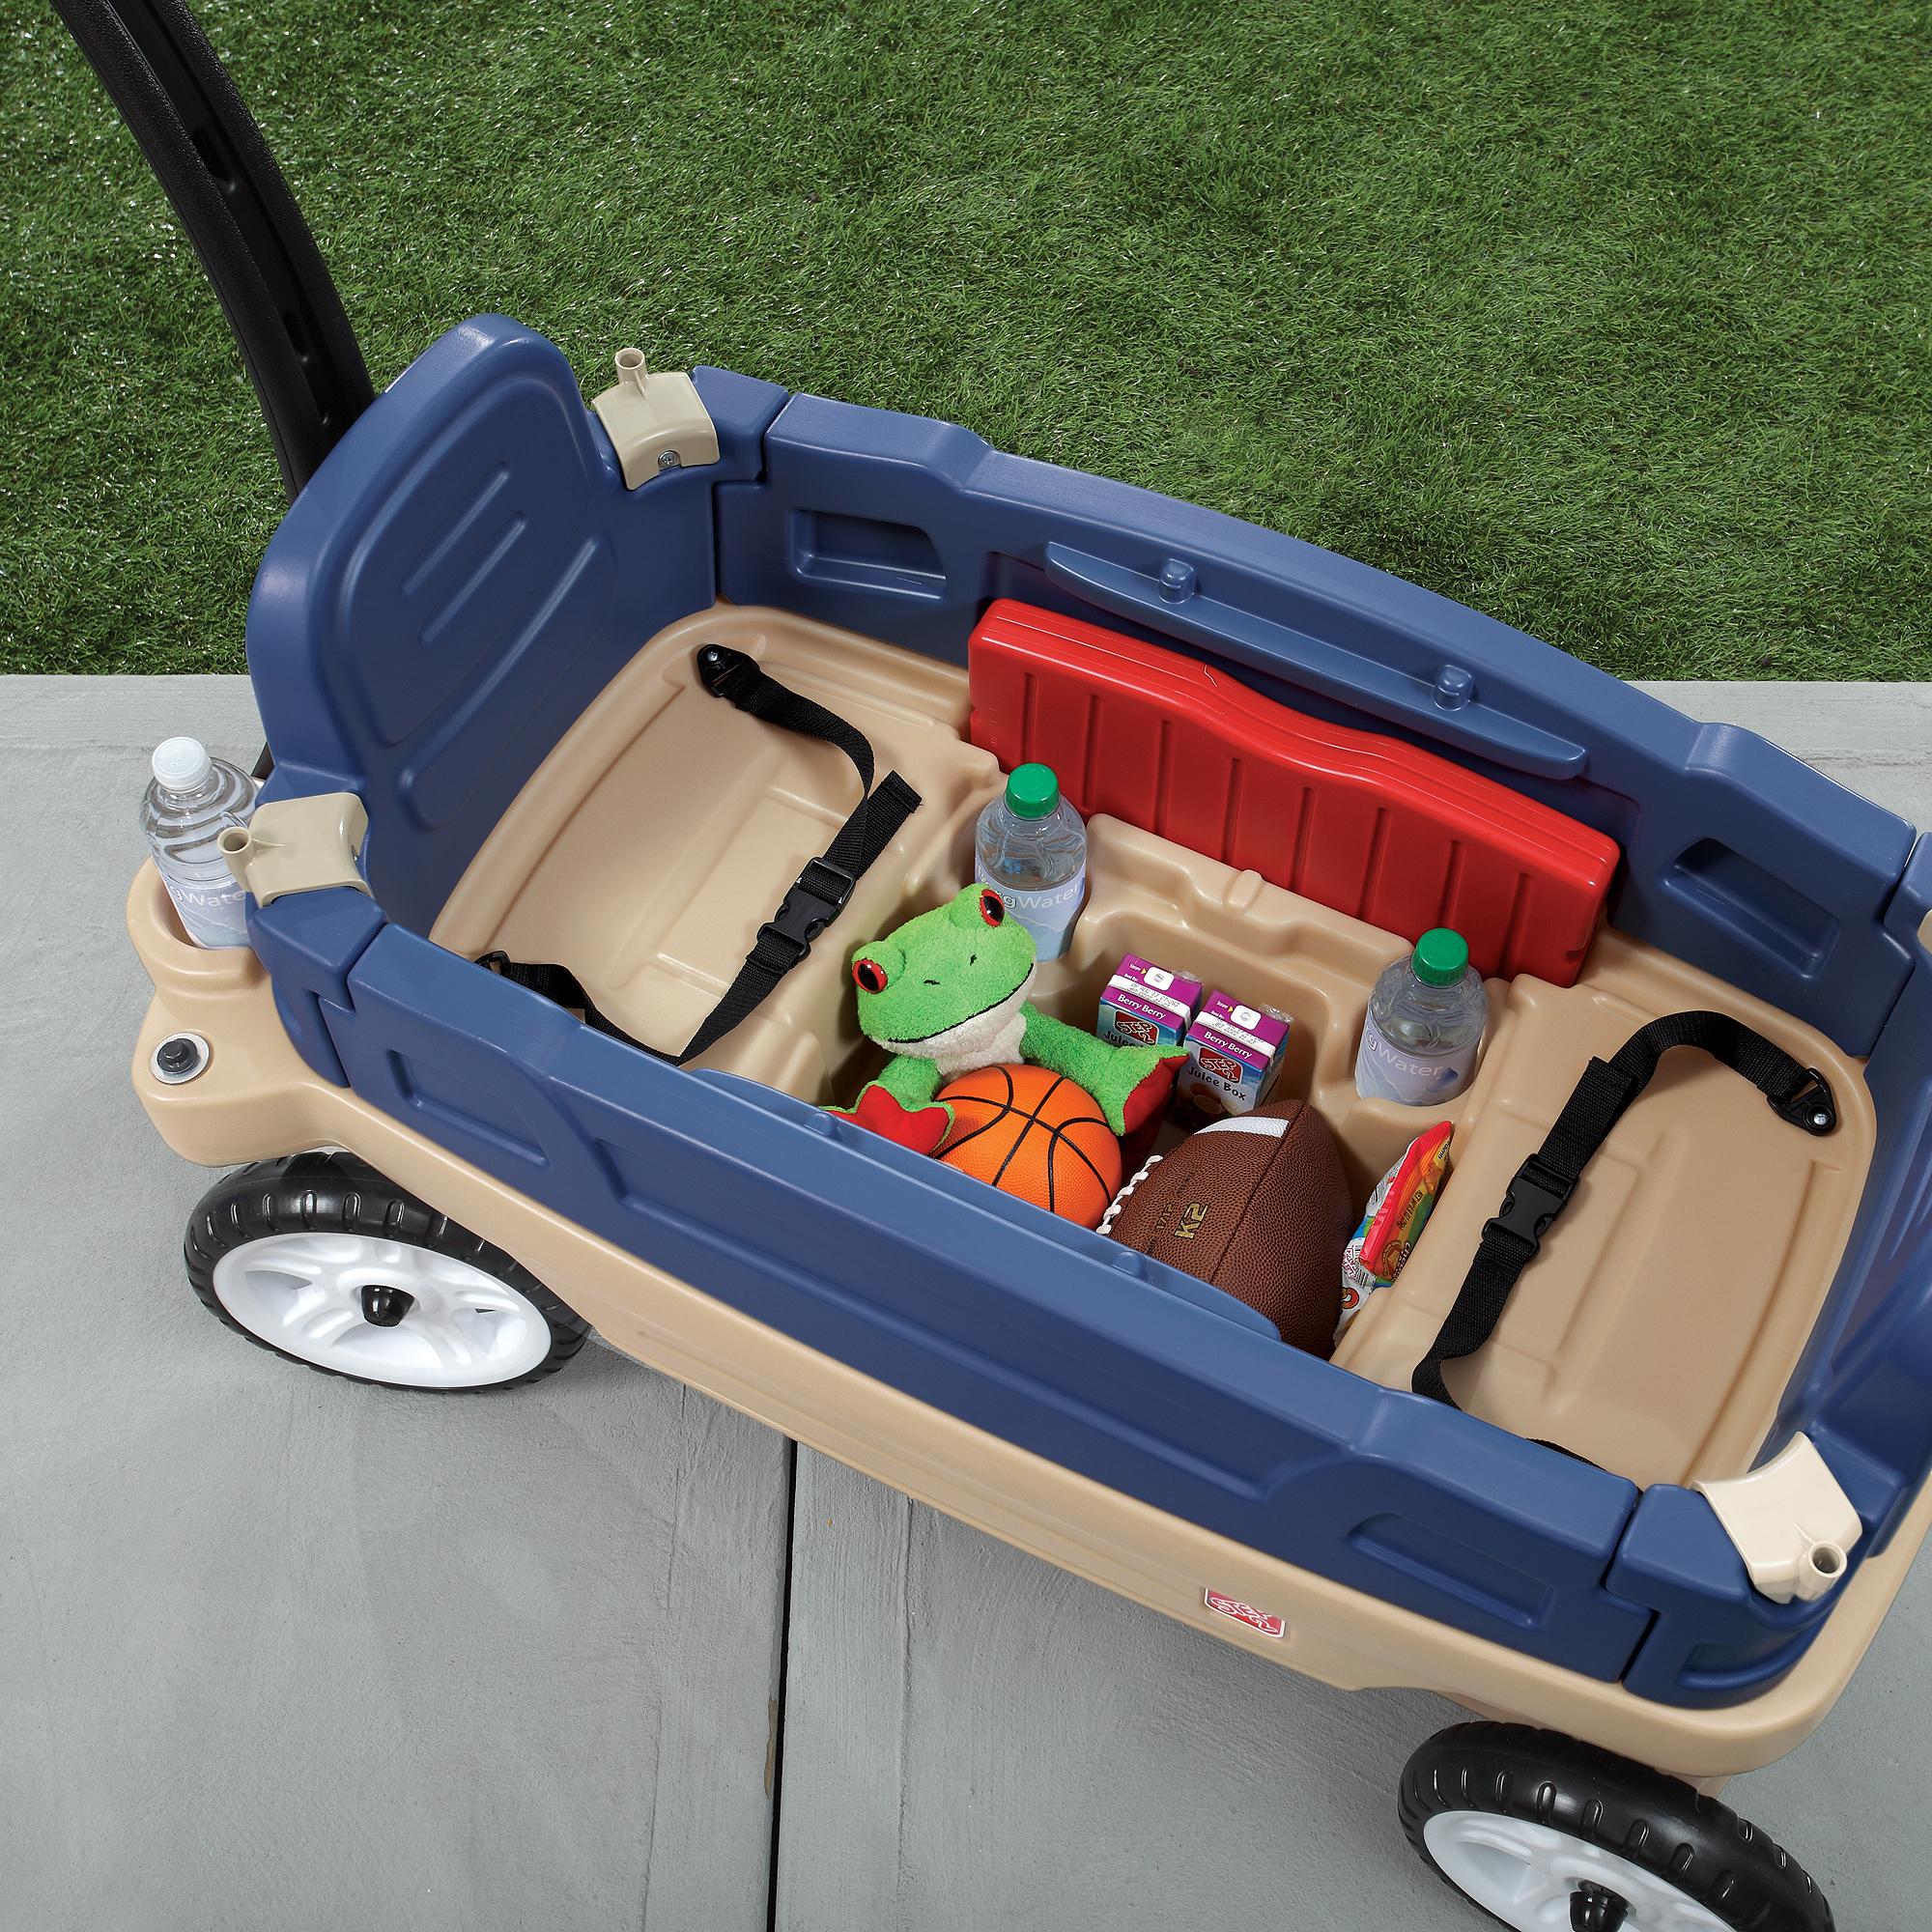 Step2 Whisper Ride Touring Wagon Plastic Canopy Wagon for Kids - image 3 of 6